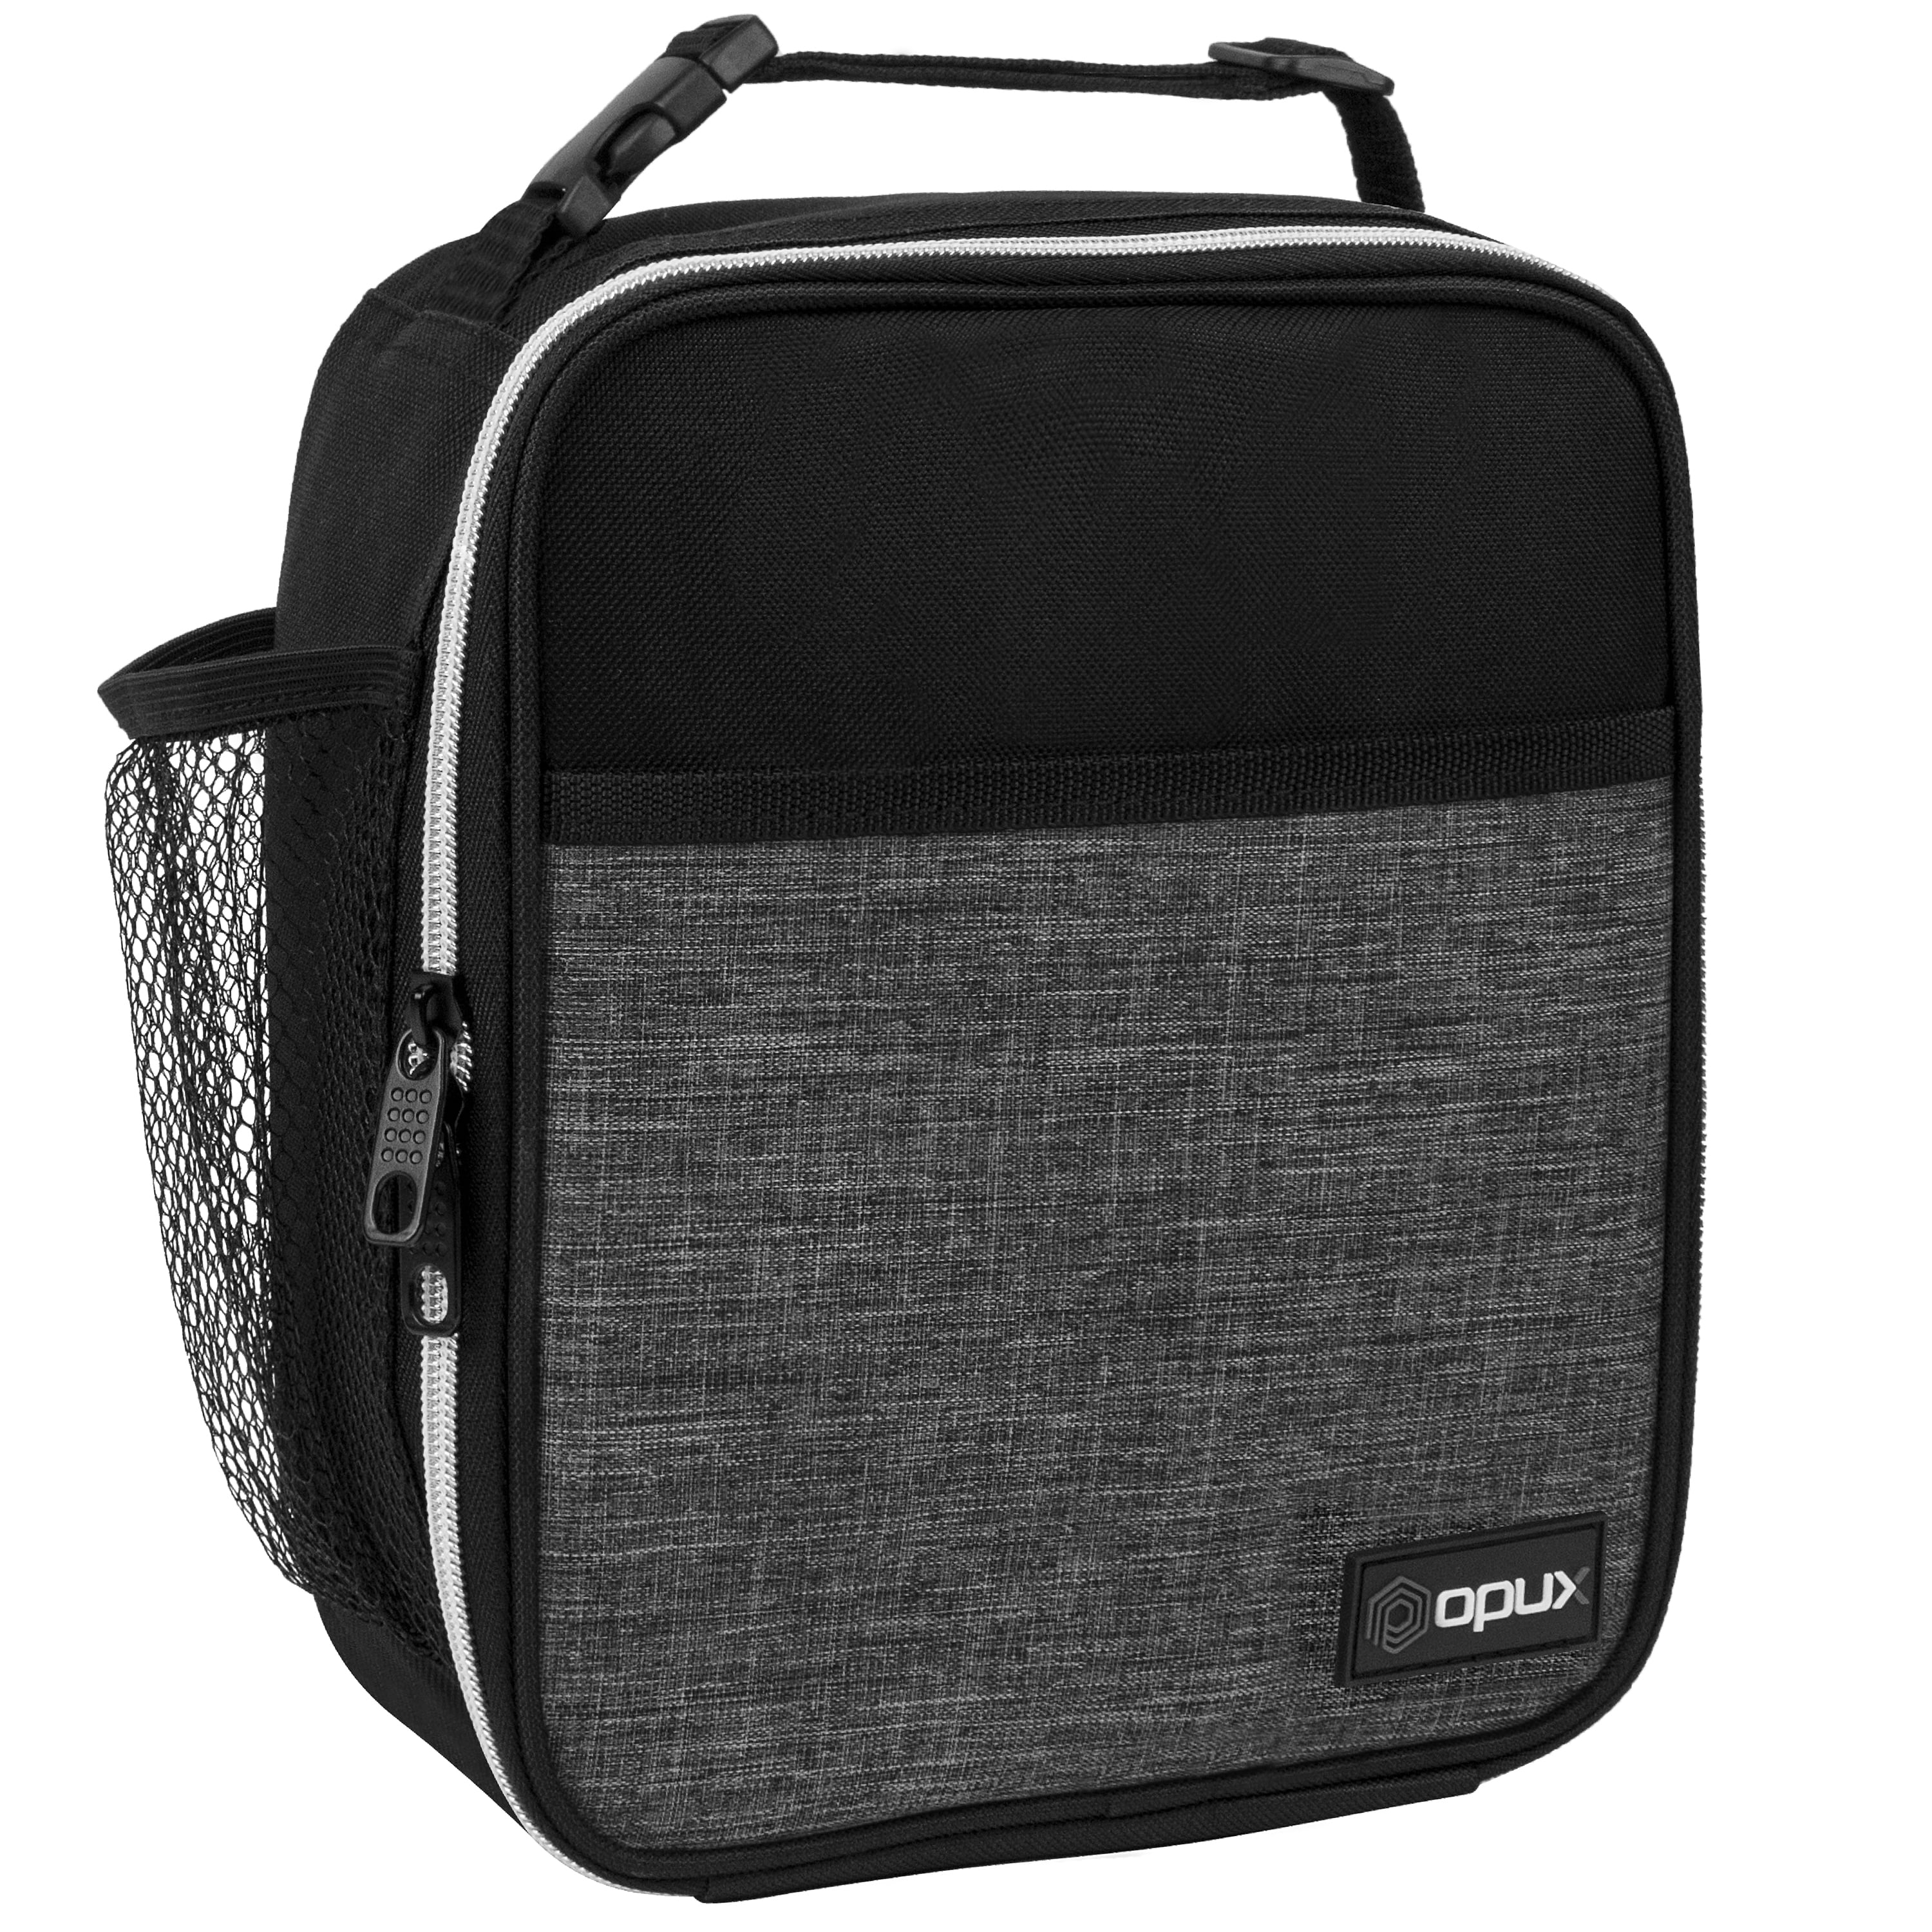 OPUX Premium Insulated Lunch Box, Soft School Lunch Bag for Kids Boys ...